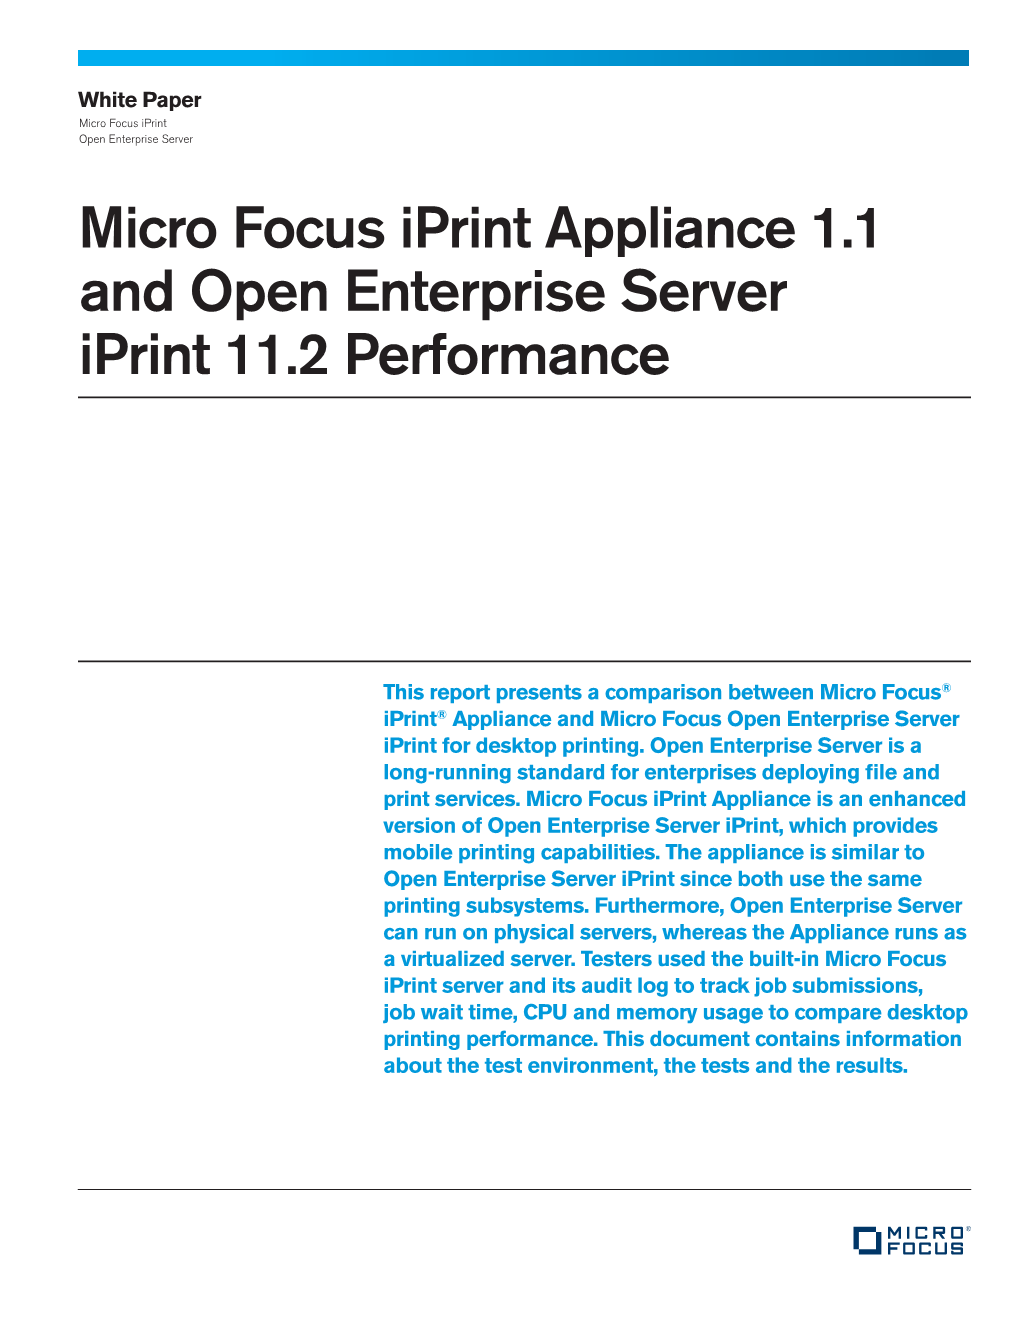 Micro Focus Iprint Appliance 1.1 and Open Enterprise Server Iprint 11.2 Performance